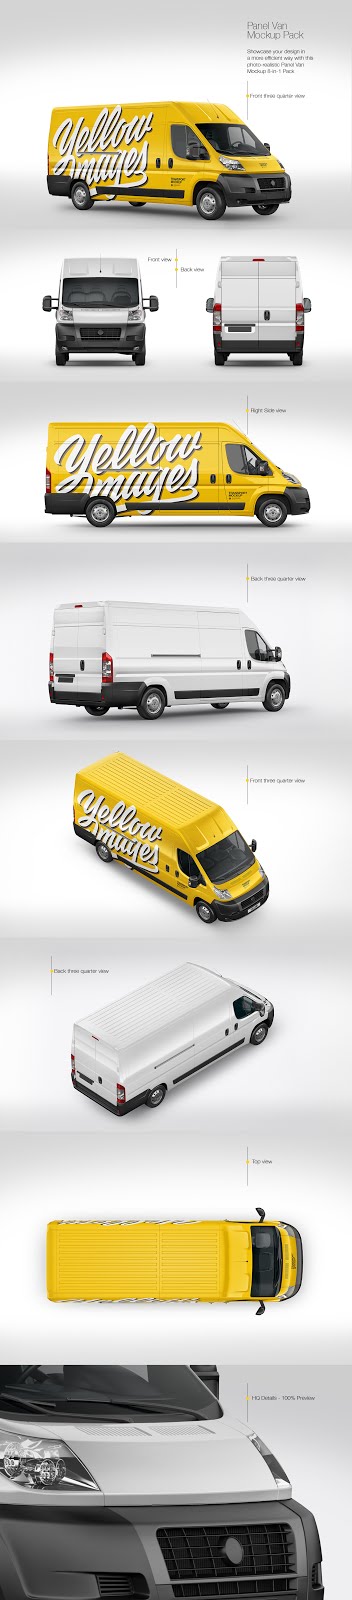 Download Commercial Vehicle Mockup Download Free And Premium Psd Mockup Templates And Design Assets PSD Mockup Templates